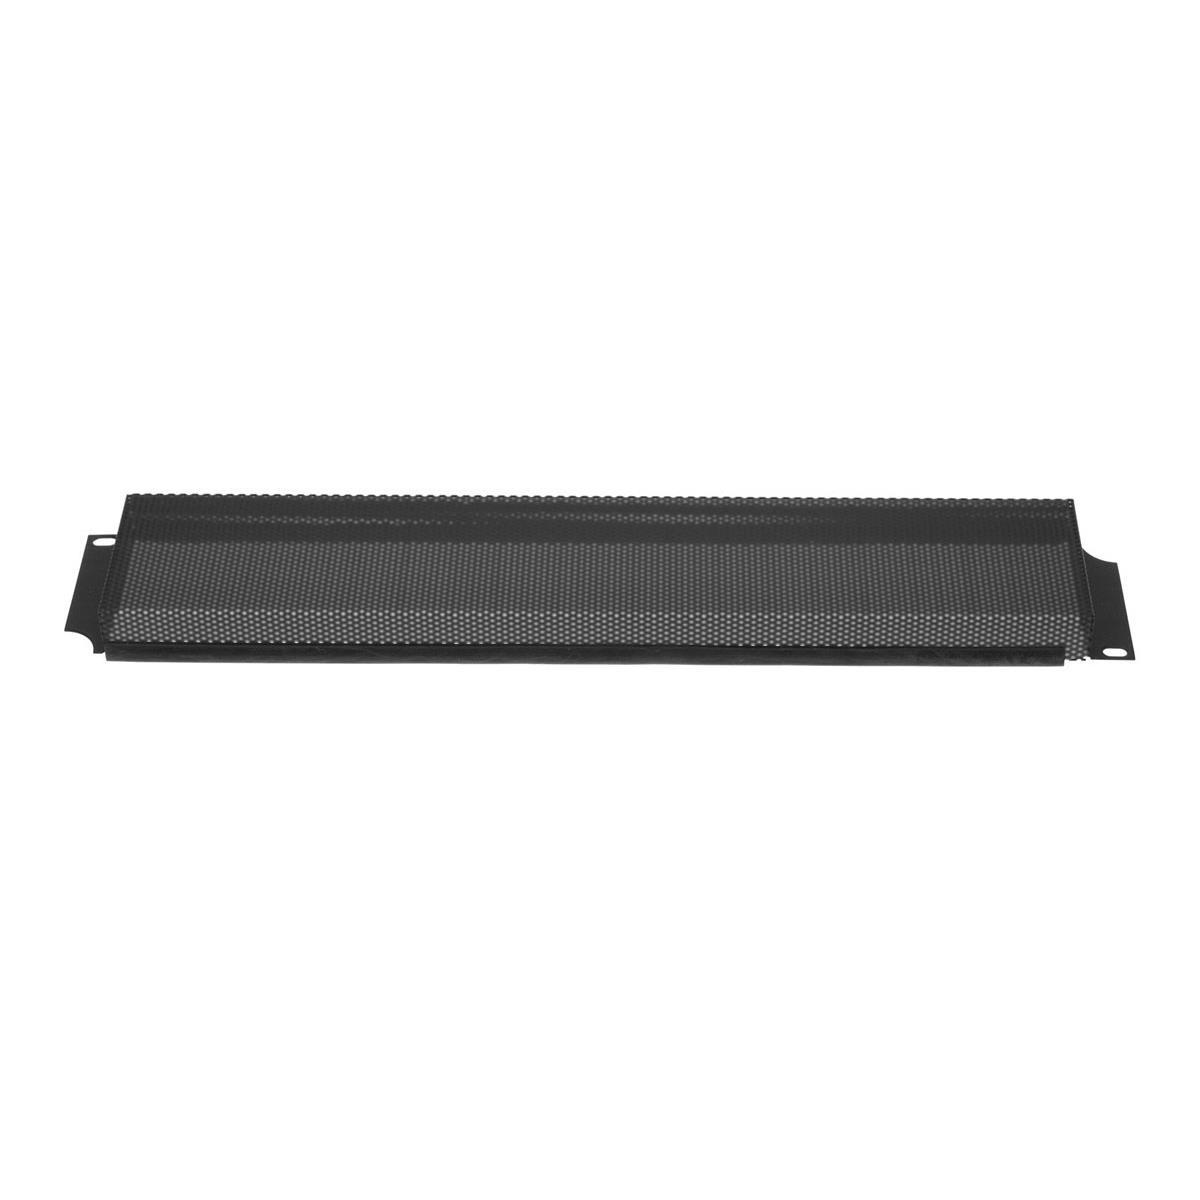 

Lowell Manufacturing SSC-2V 2U Rack Panel Security Cover, Vented , Black